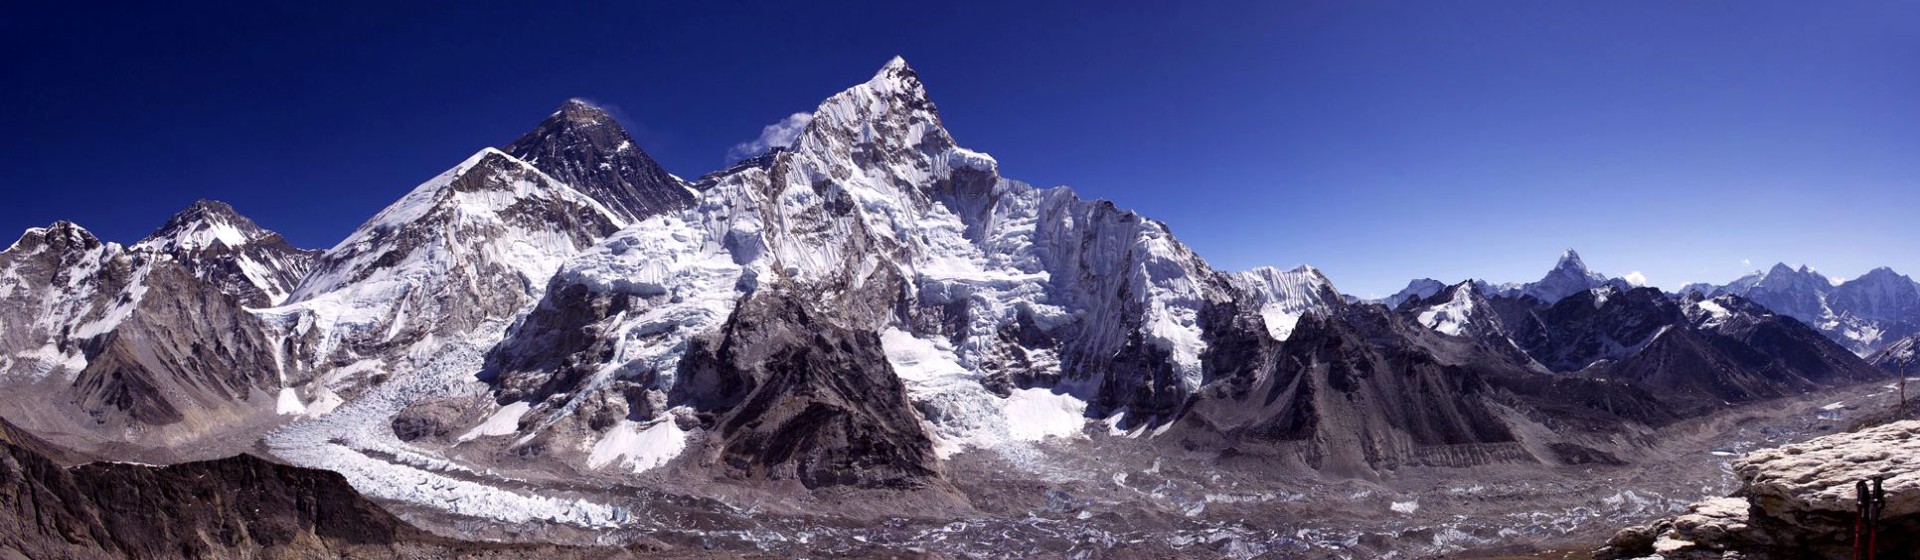 How Difficult is Everest Base Camp Trek?